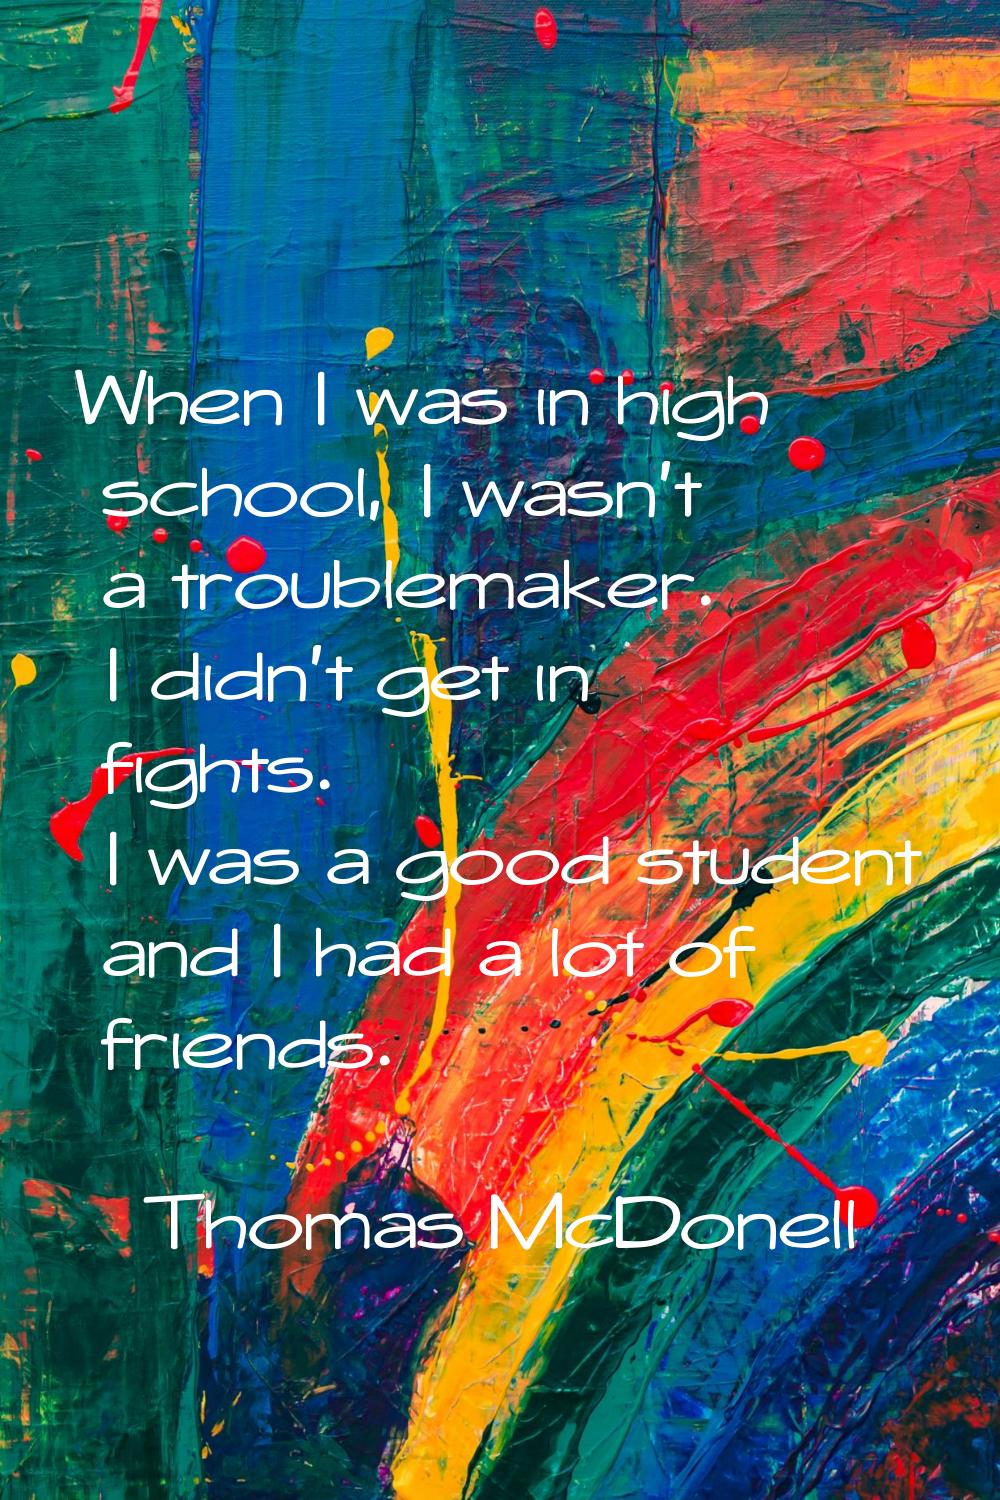 When I was in high school, I wasn't a troublemaker. I didn't get in fights. I was a good student an